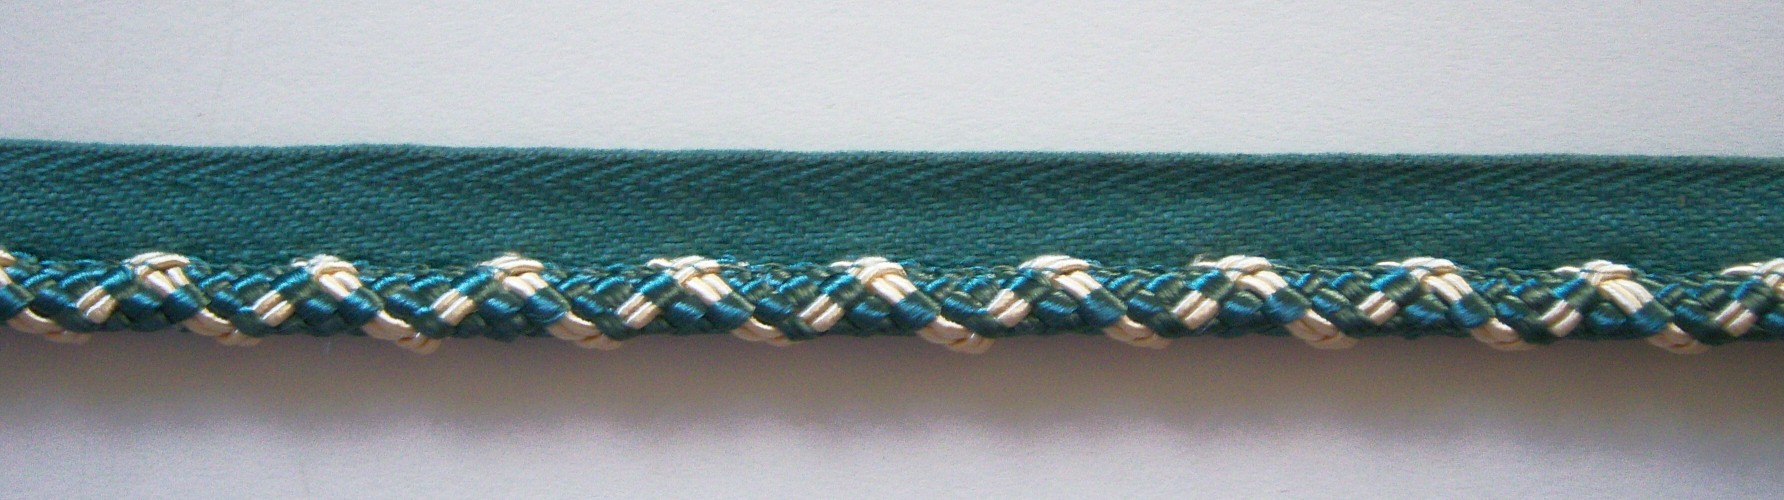 Teal/Ivory 5/16" Piping